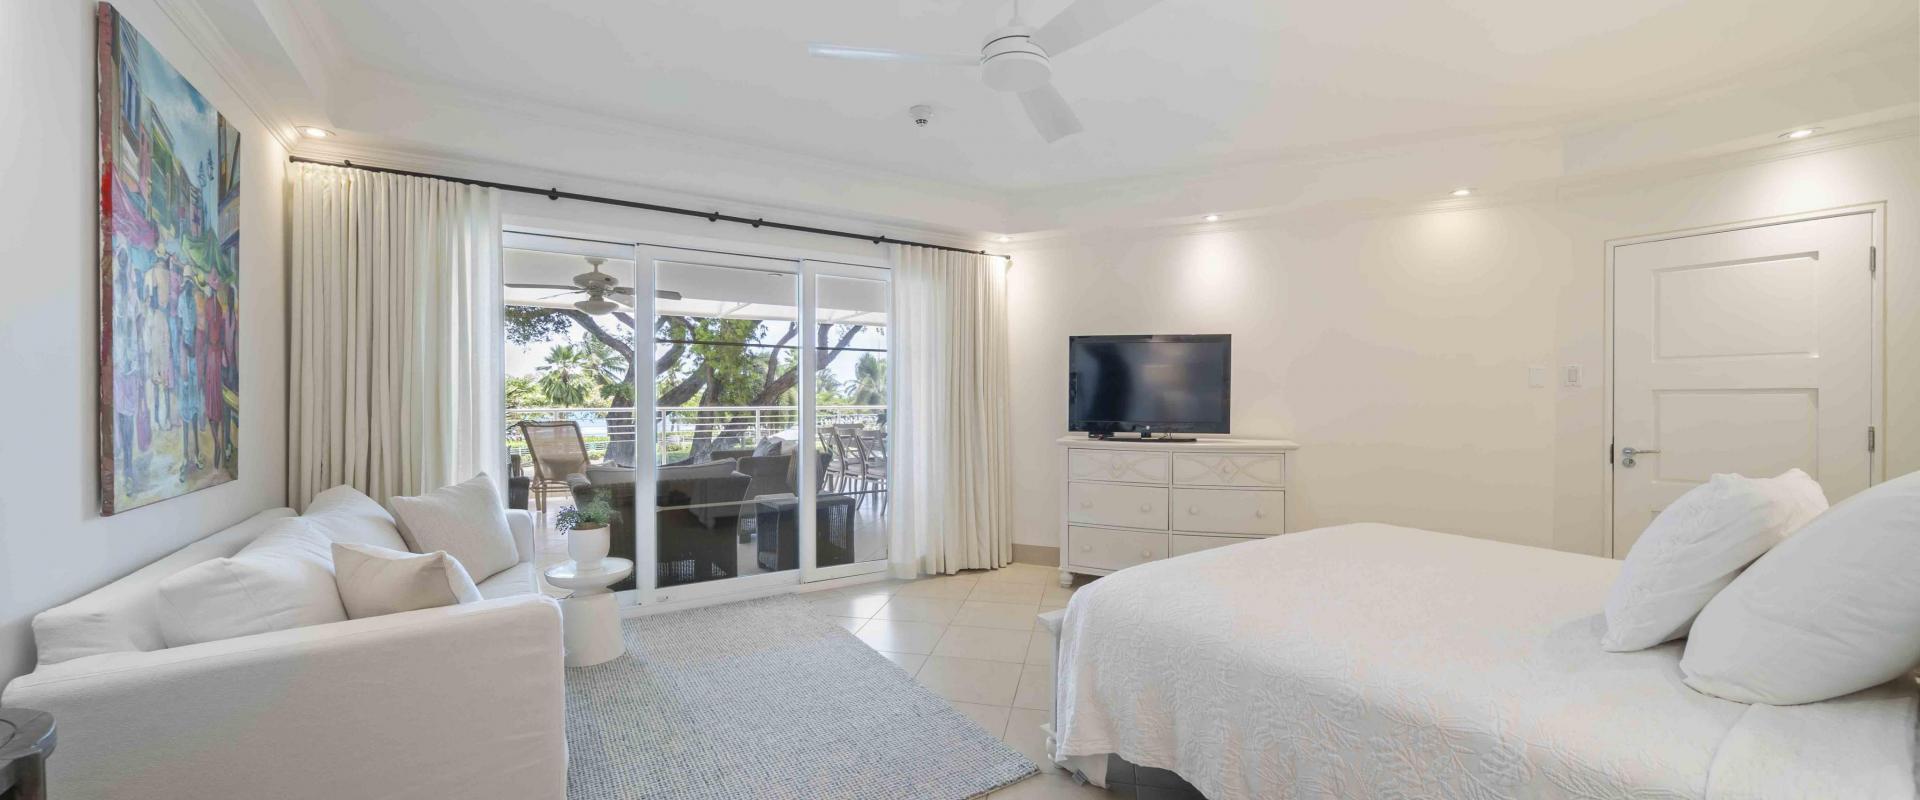 Palm Beach 204 Barbados Beachfront Condo Rental Master Bedroom With Seaview and Seating Area